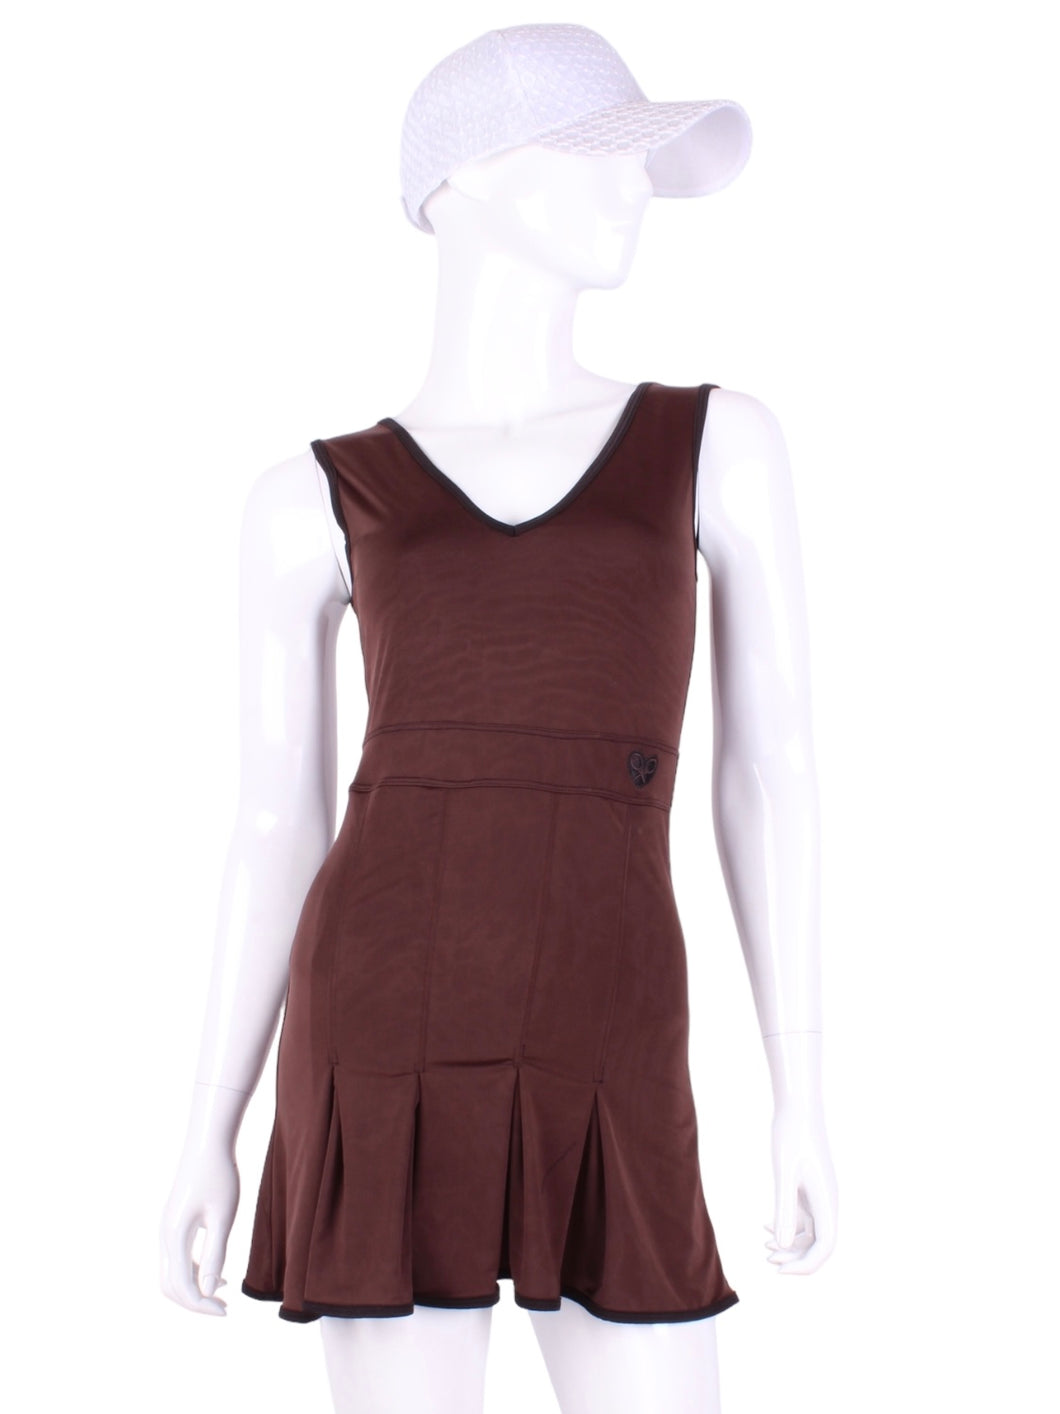 The Angelina Dress is from our sophisticated and elegant collections, for women with a flair for looking good.   Wear this stunning piece straight from the court....to cocktails.  This style is in our chocolate brown design, with a flattering v-neck neckline.  This soft, silky, and sexy tennis dress is lightweight, and very comfortable, providing plenty of flexibility to play both on and off of the court.